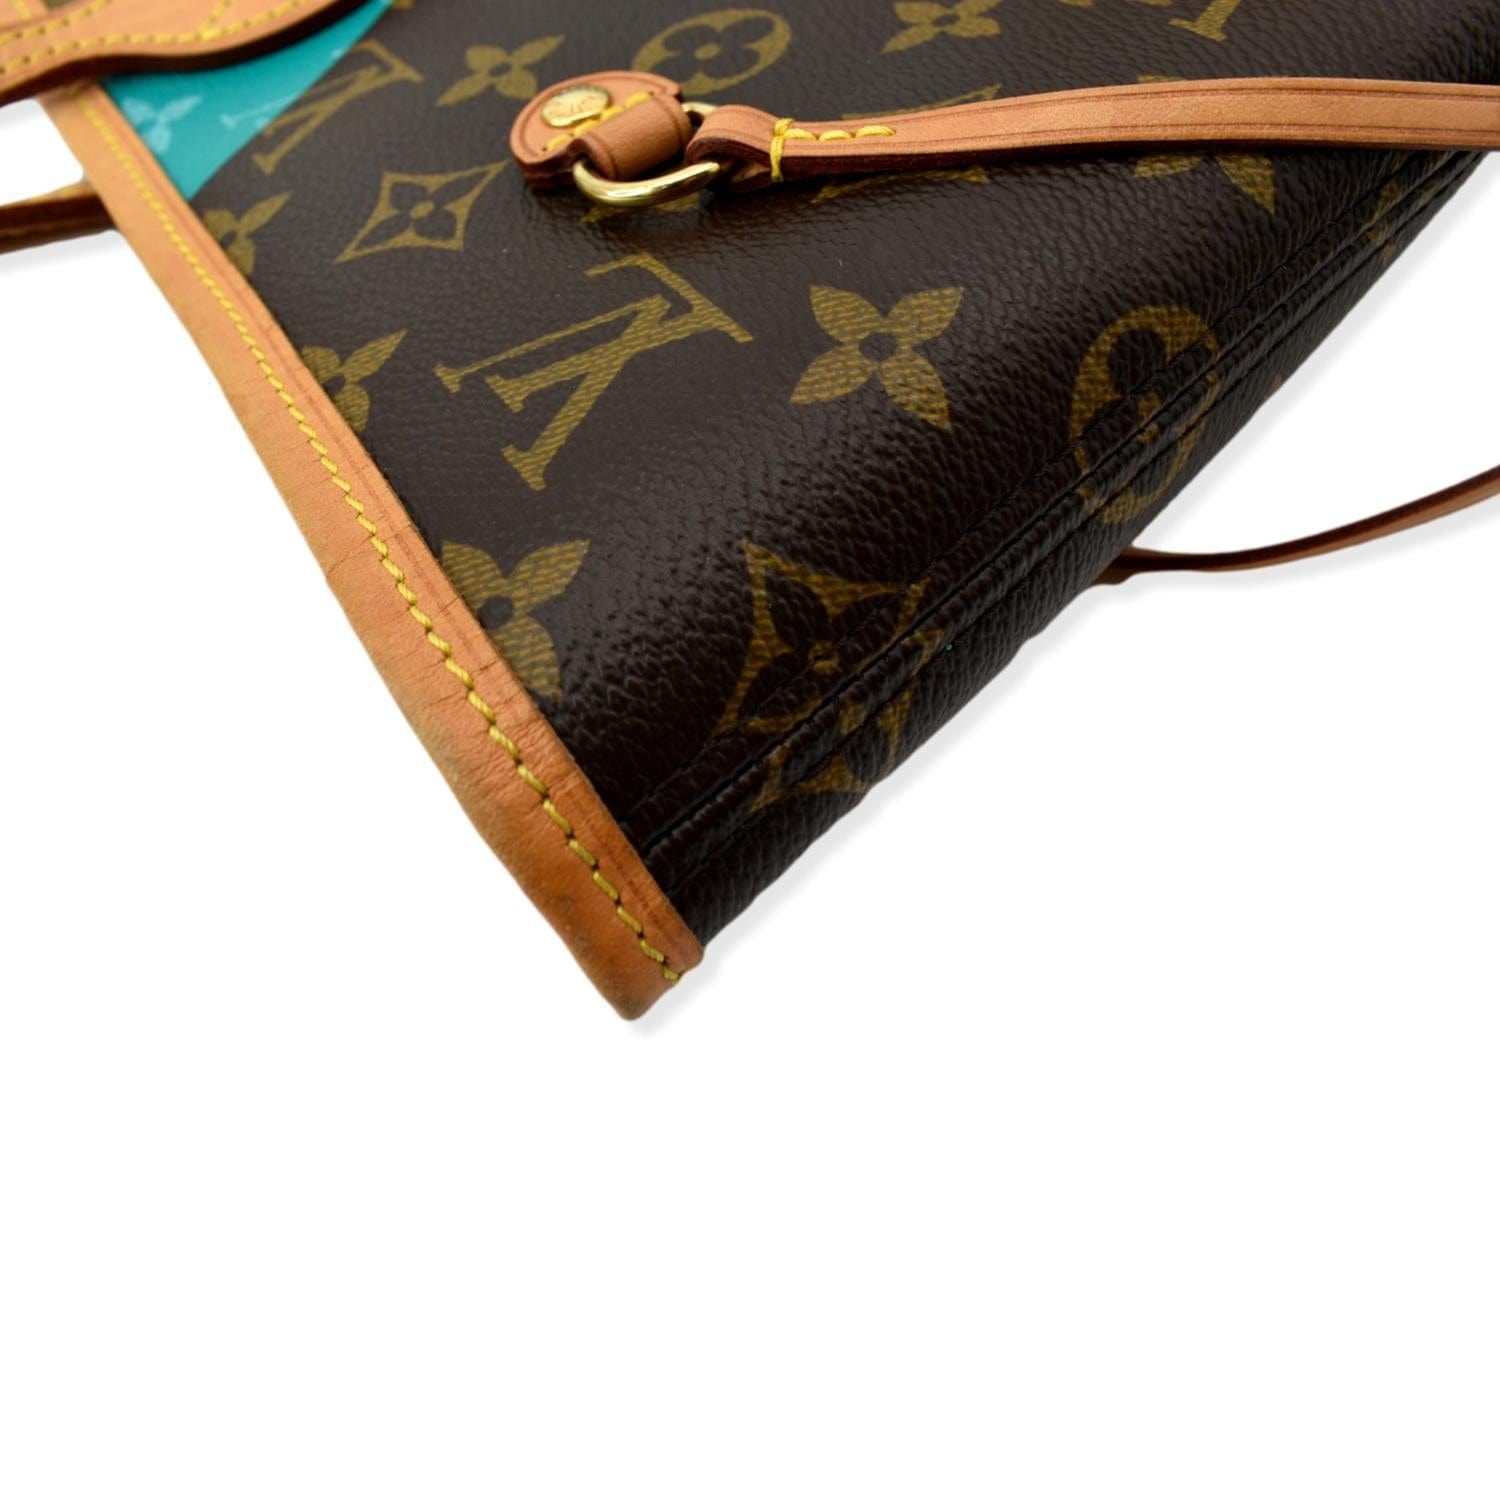 Louis Vuitton Limited Edition Green Monogram V Neverfull MM